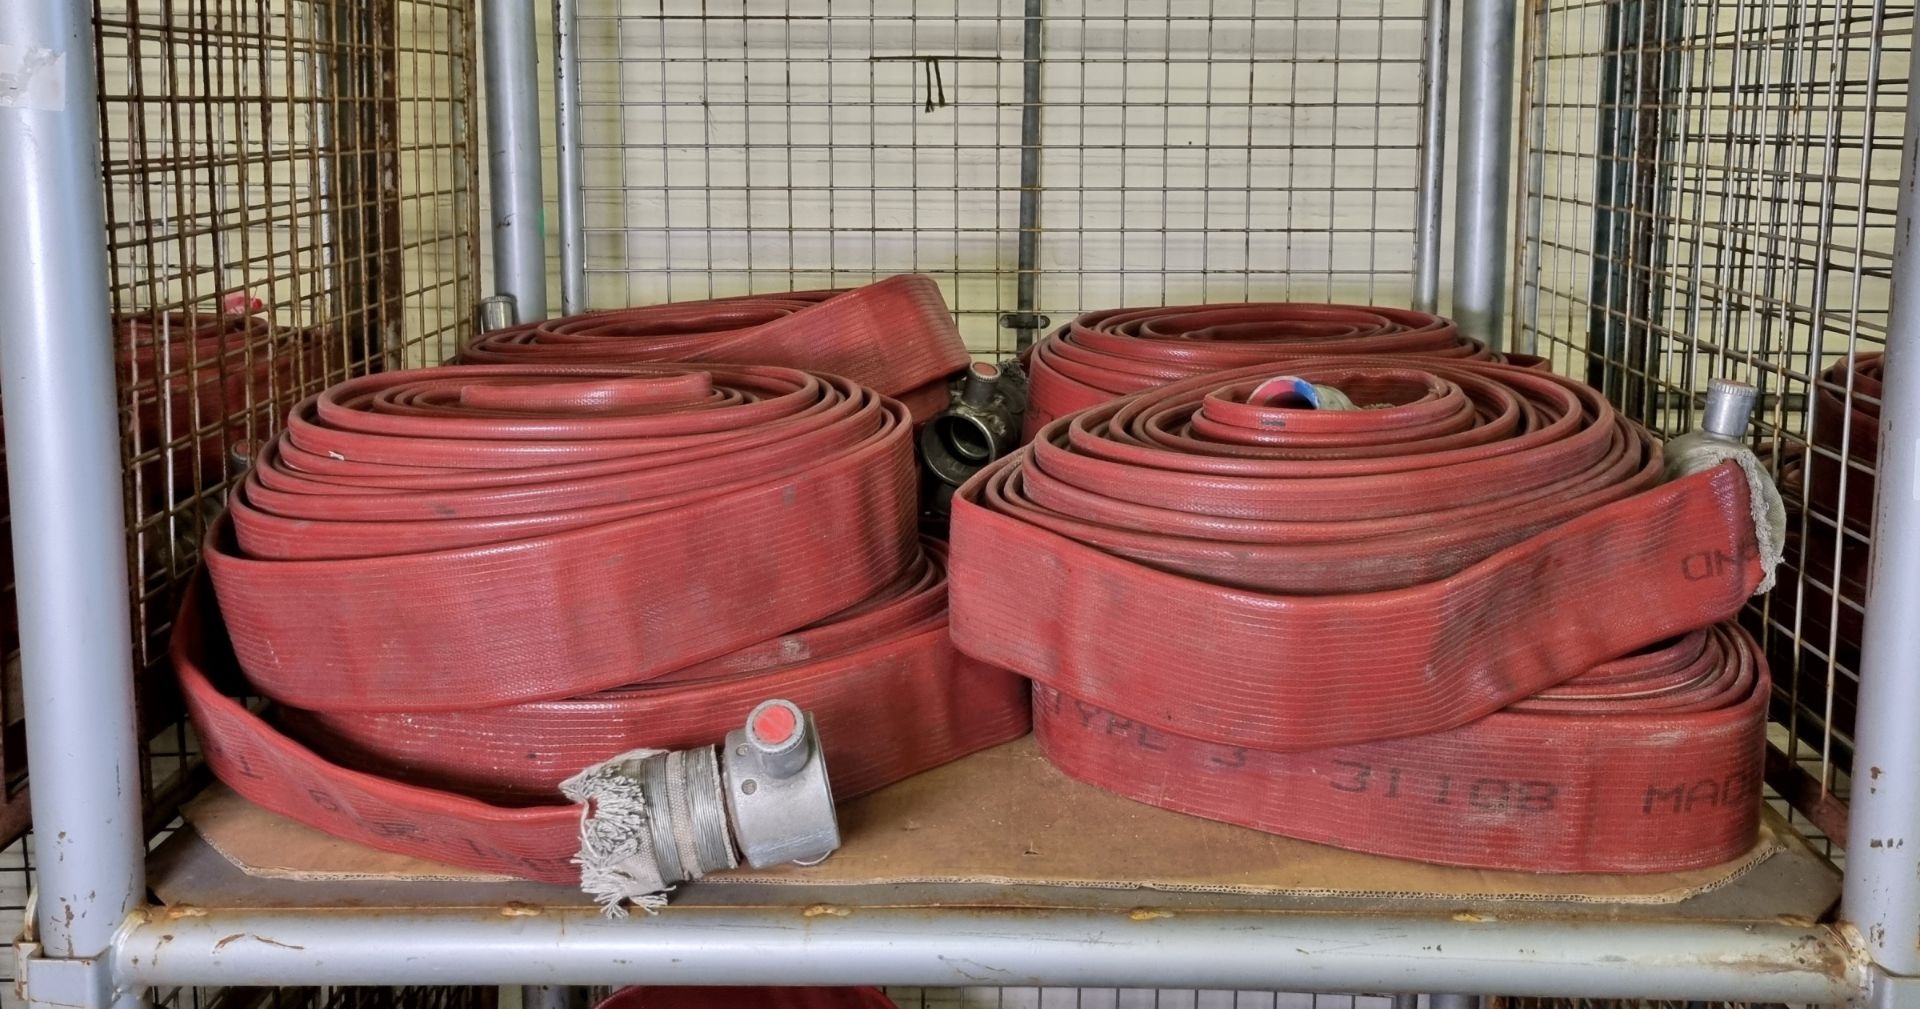 8x Angus Duraline 70mm lay flat hoses with couplings - approx 23 M in length